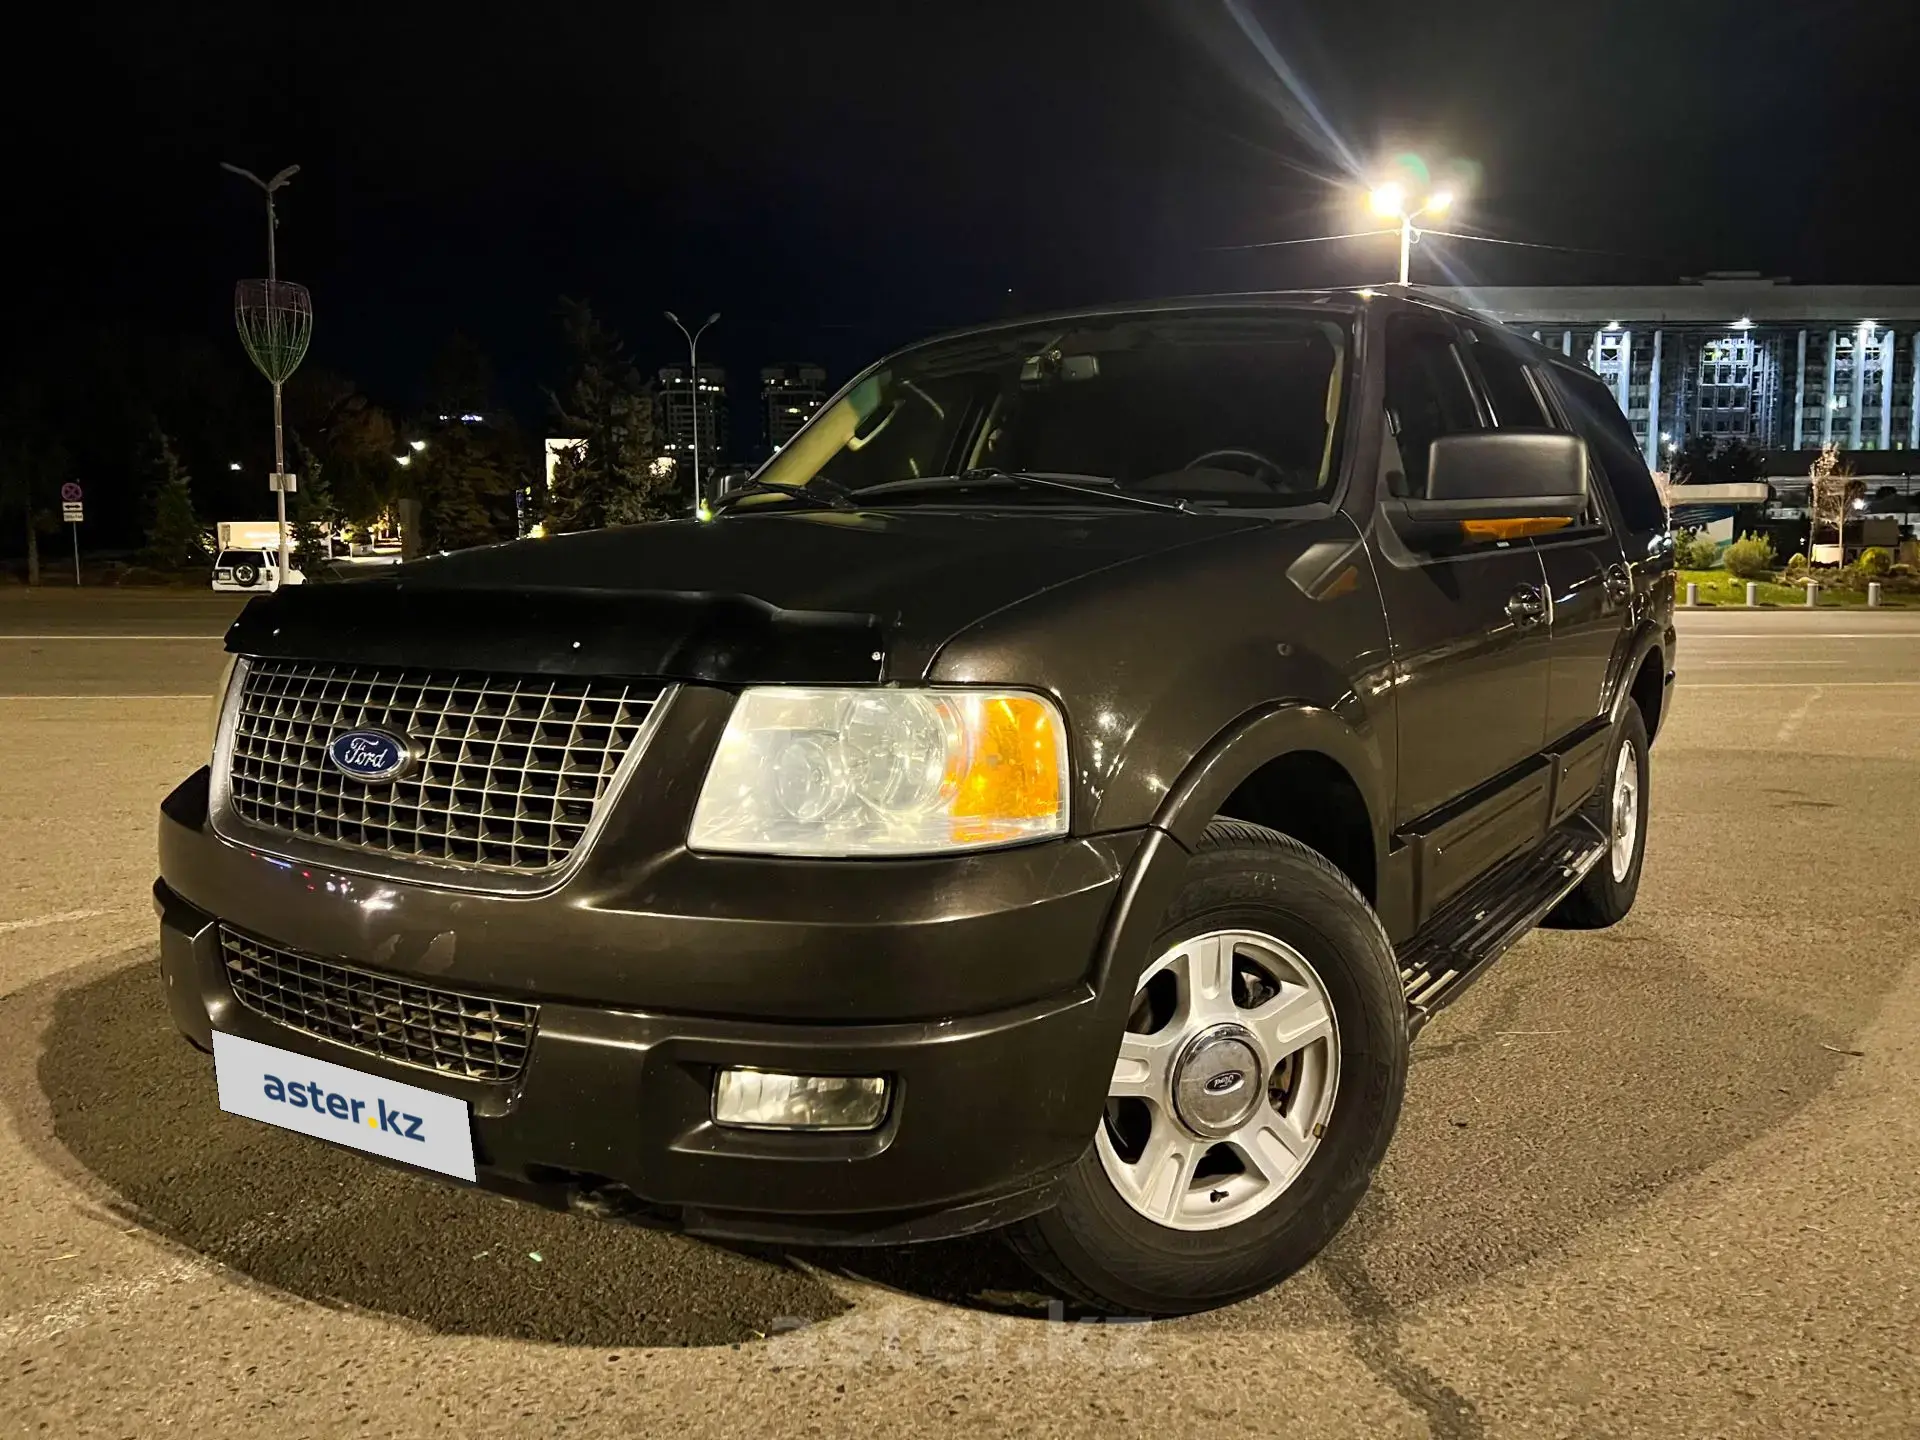 Ford Expedition 2006